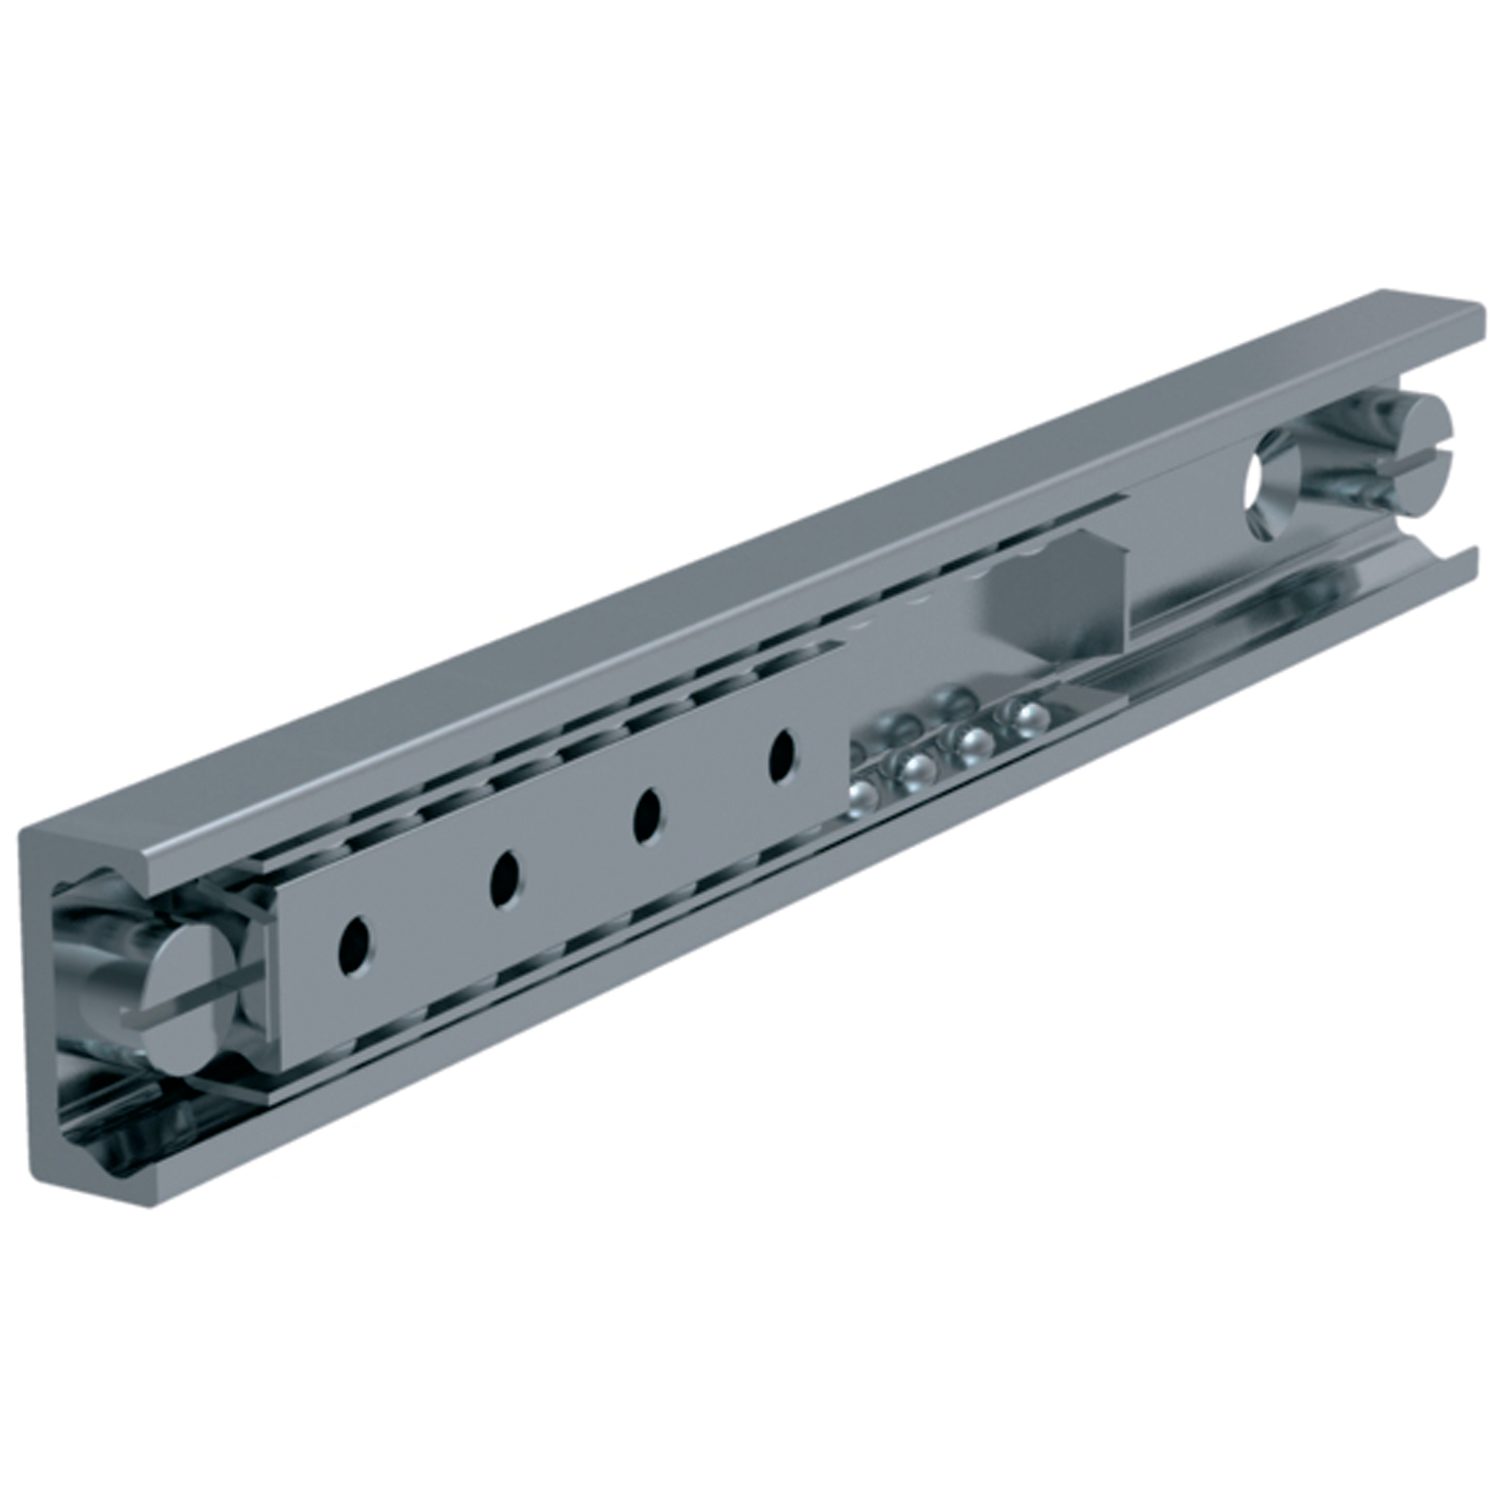 High Load Rails Easy slide high-load guides come in sizes 28, 35, 43 or 63. They are made from zinc-plated steel with induction-hardened steel raceways.